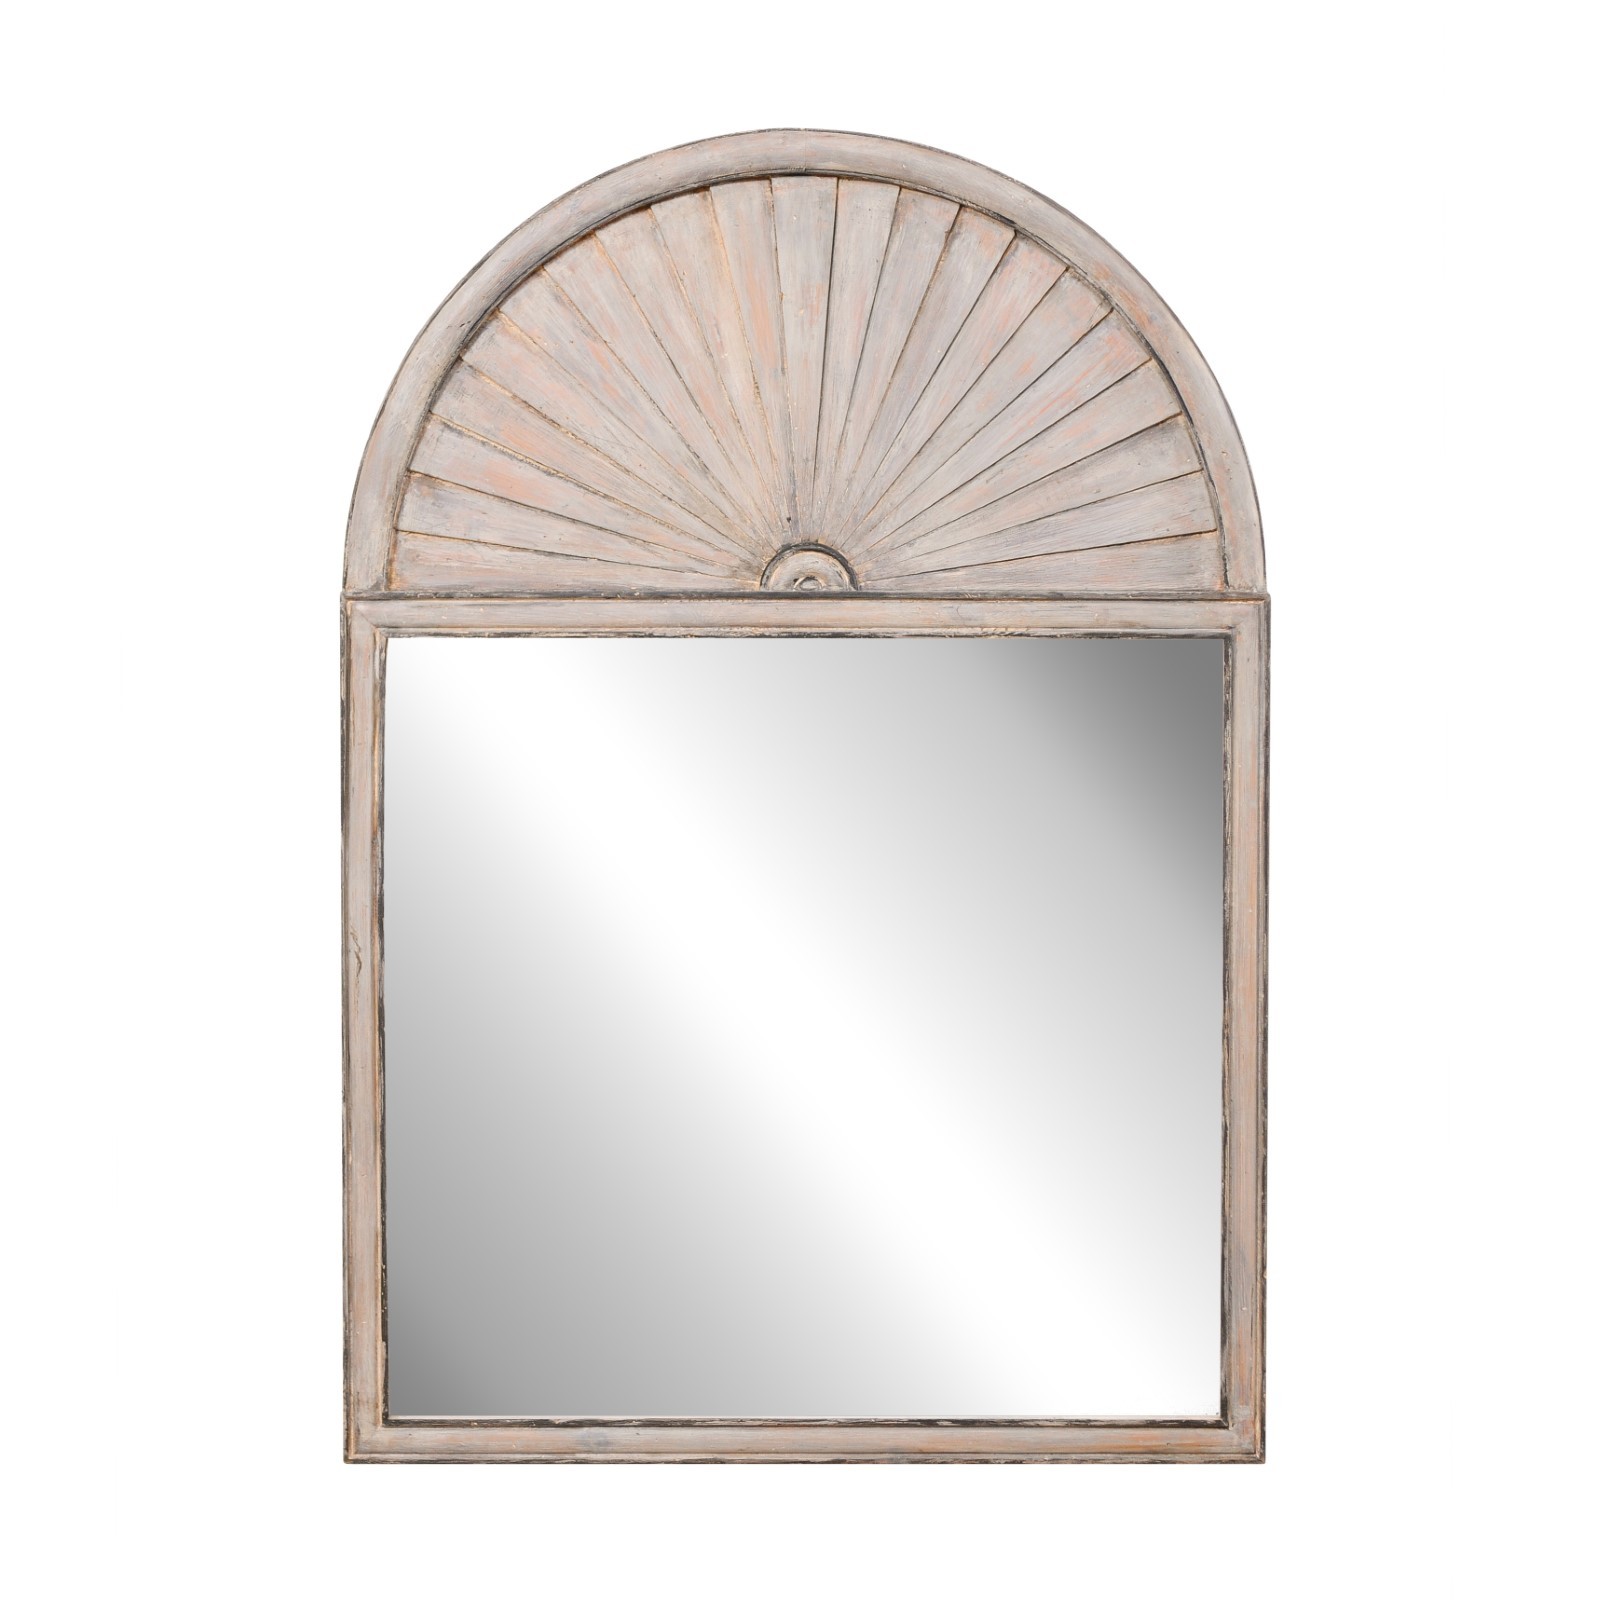 Spanish Mirror w/Fan Carved Arched Crest